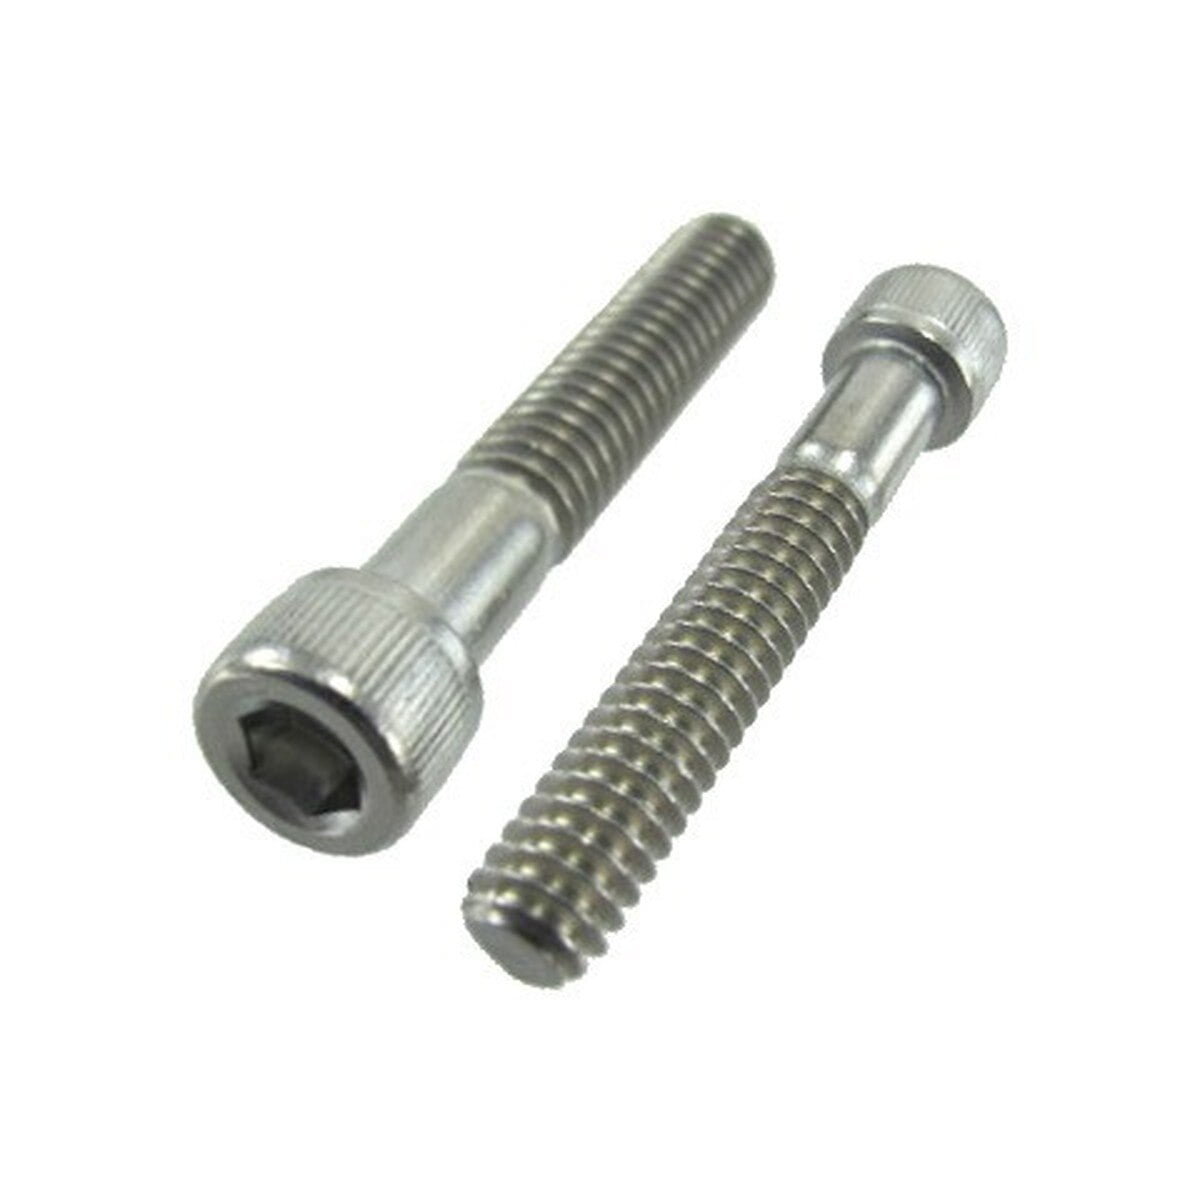 100 Qty 3/8-16 x 2" Stainless Steel Hex Head Cap Screws Bolts 